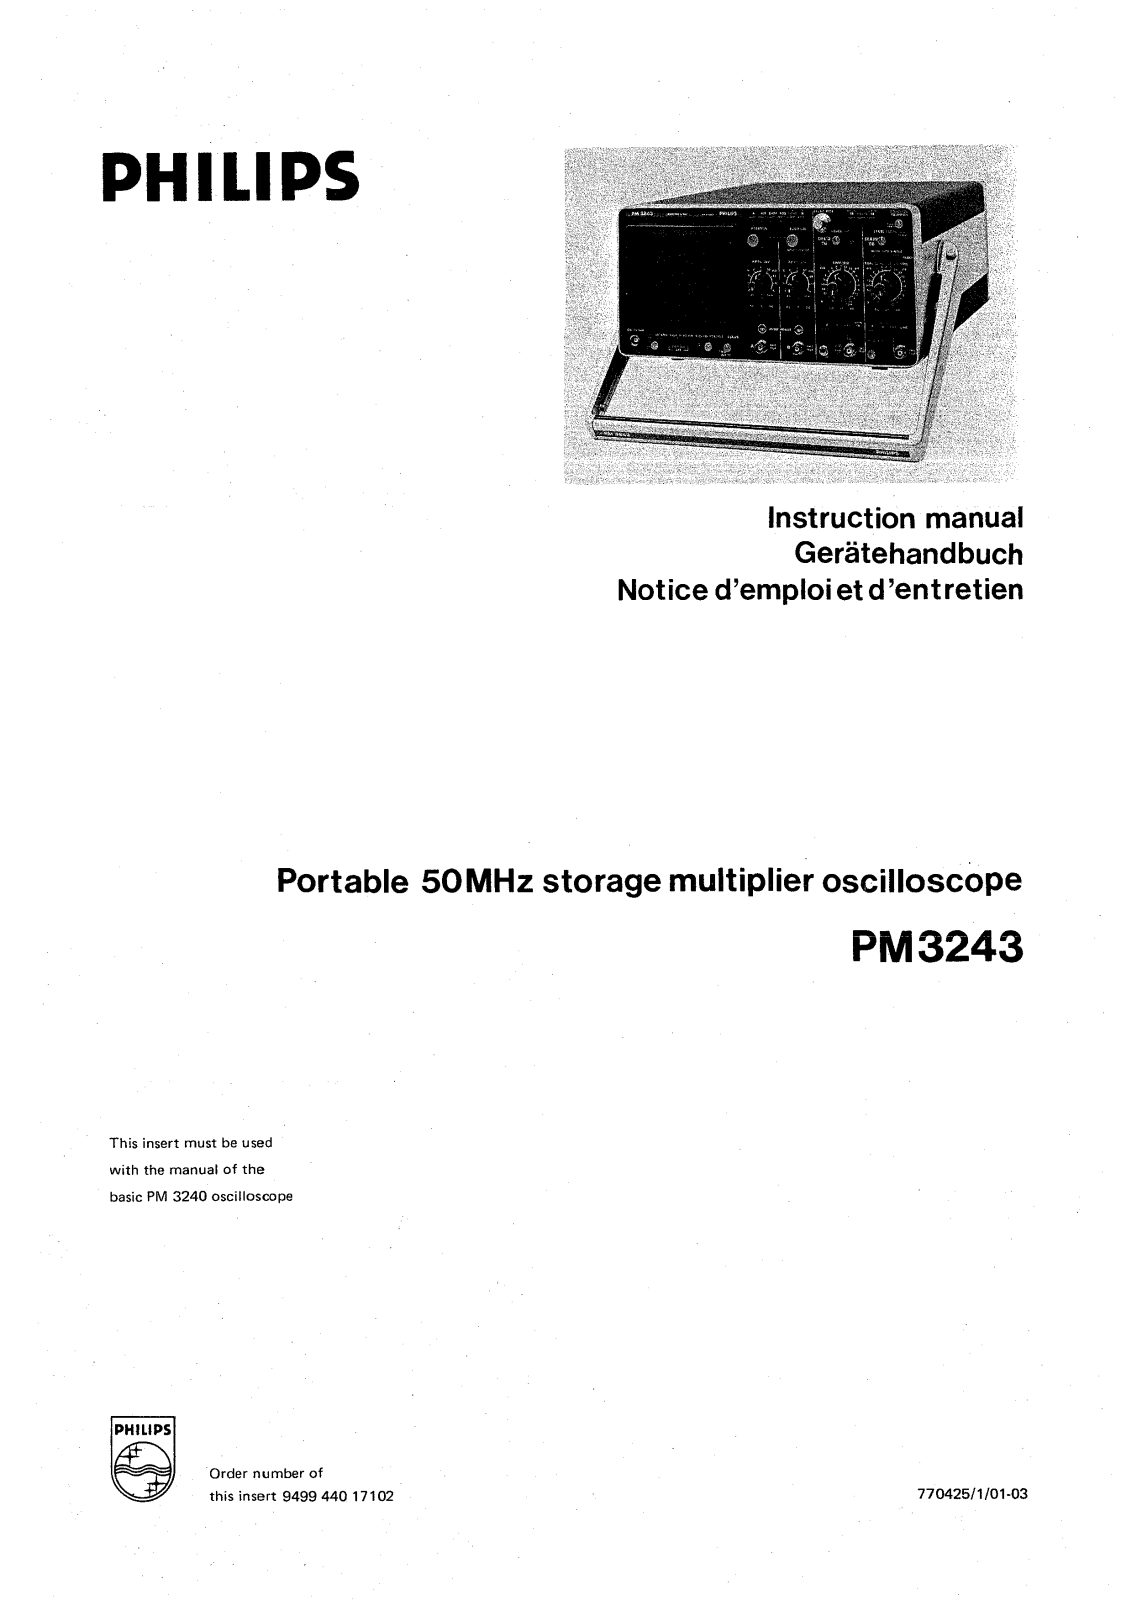 Philips PM-3243 Service Manual